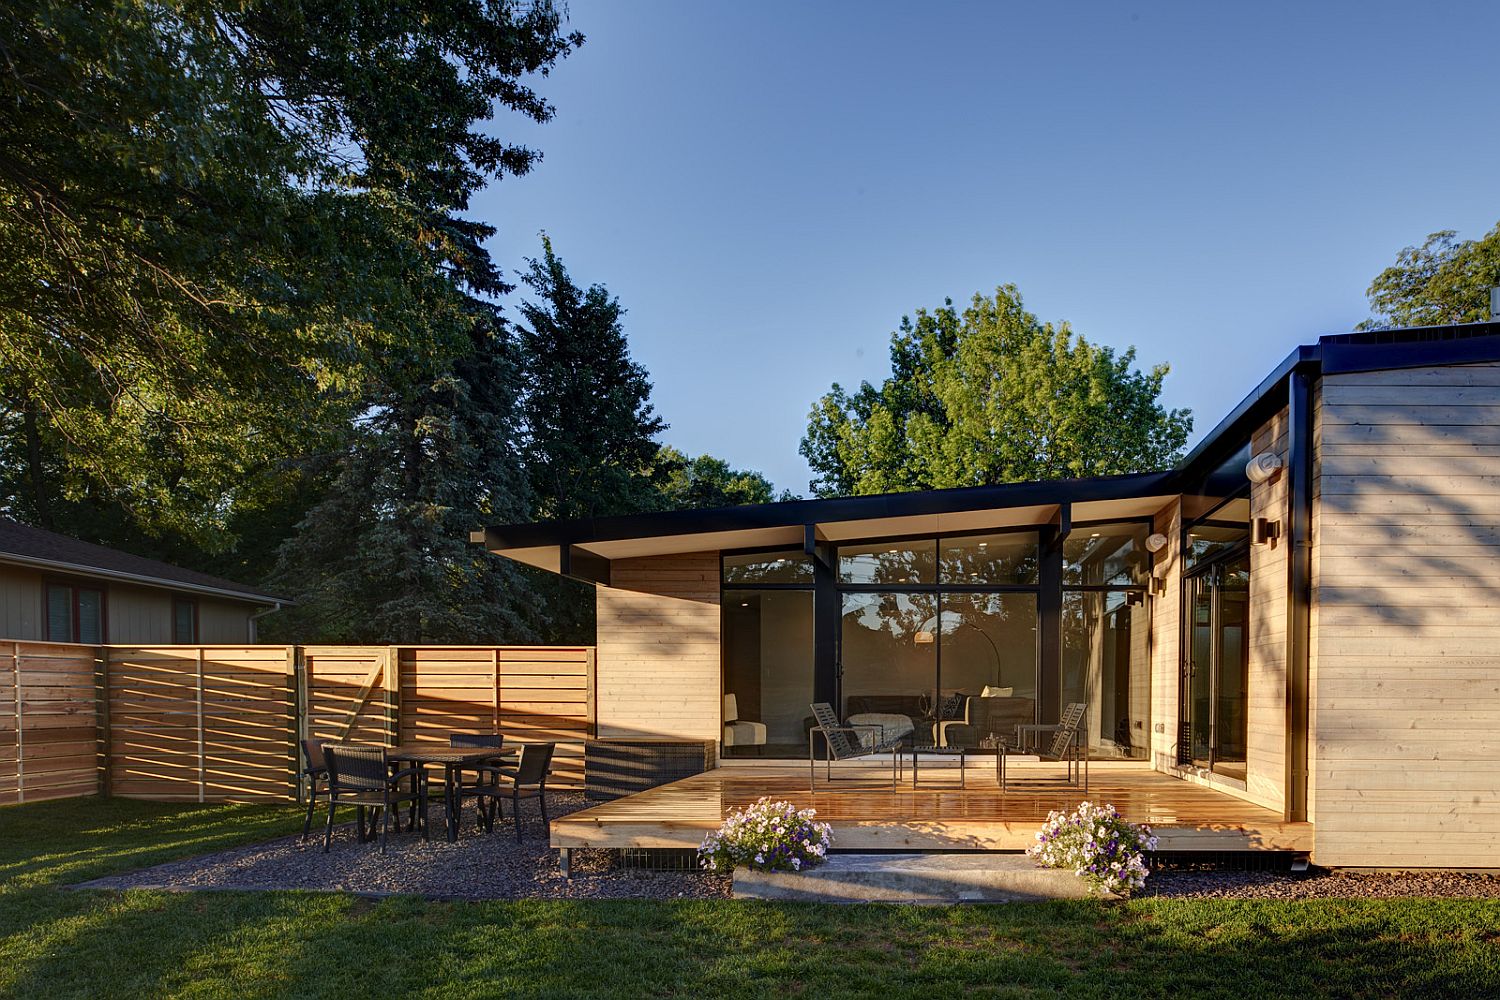 Ruined Shack Turned into an Energy-Efficient Green Home in Iowa City